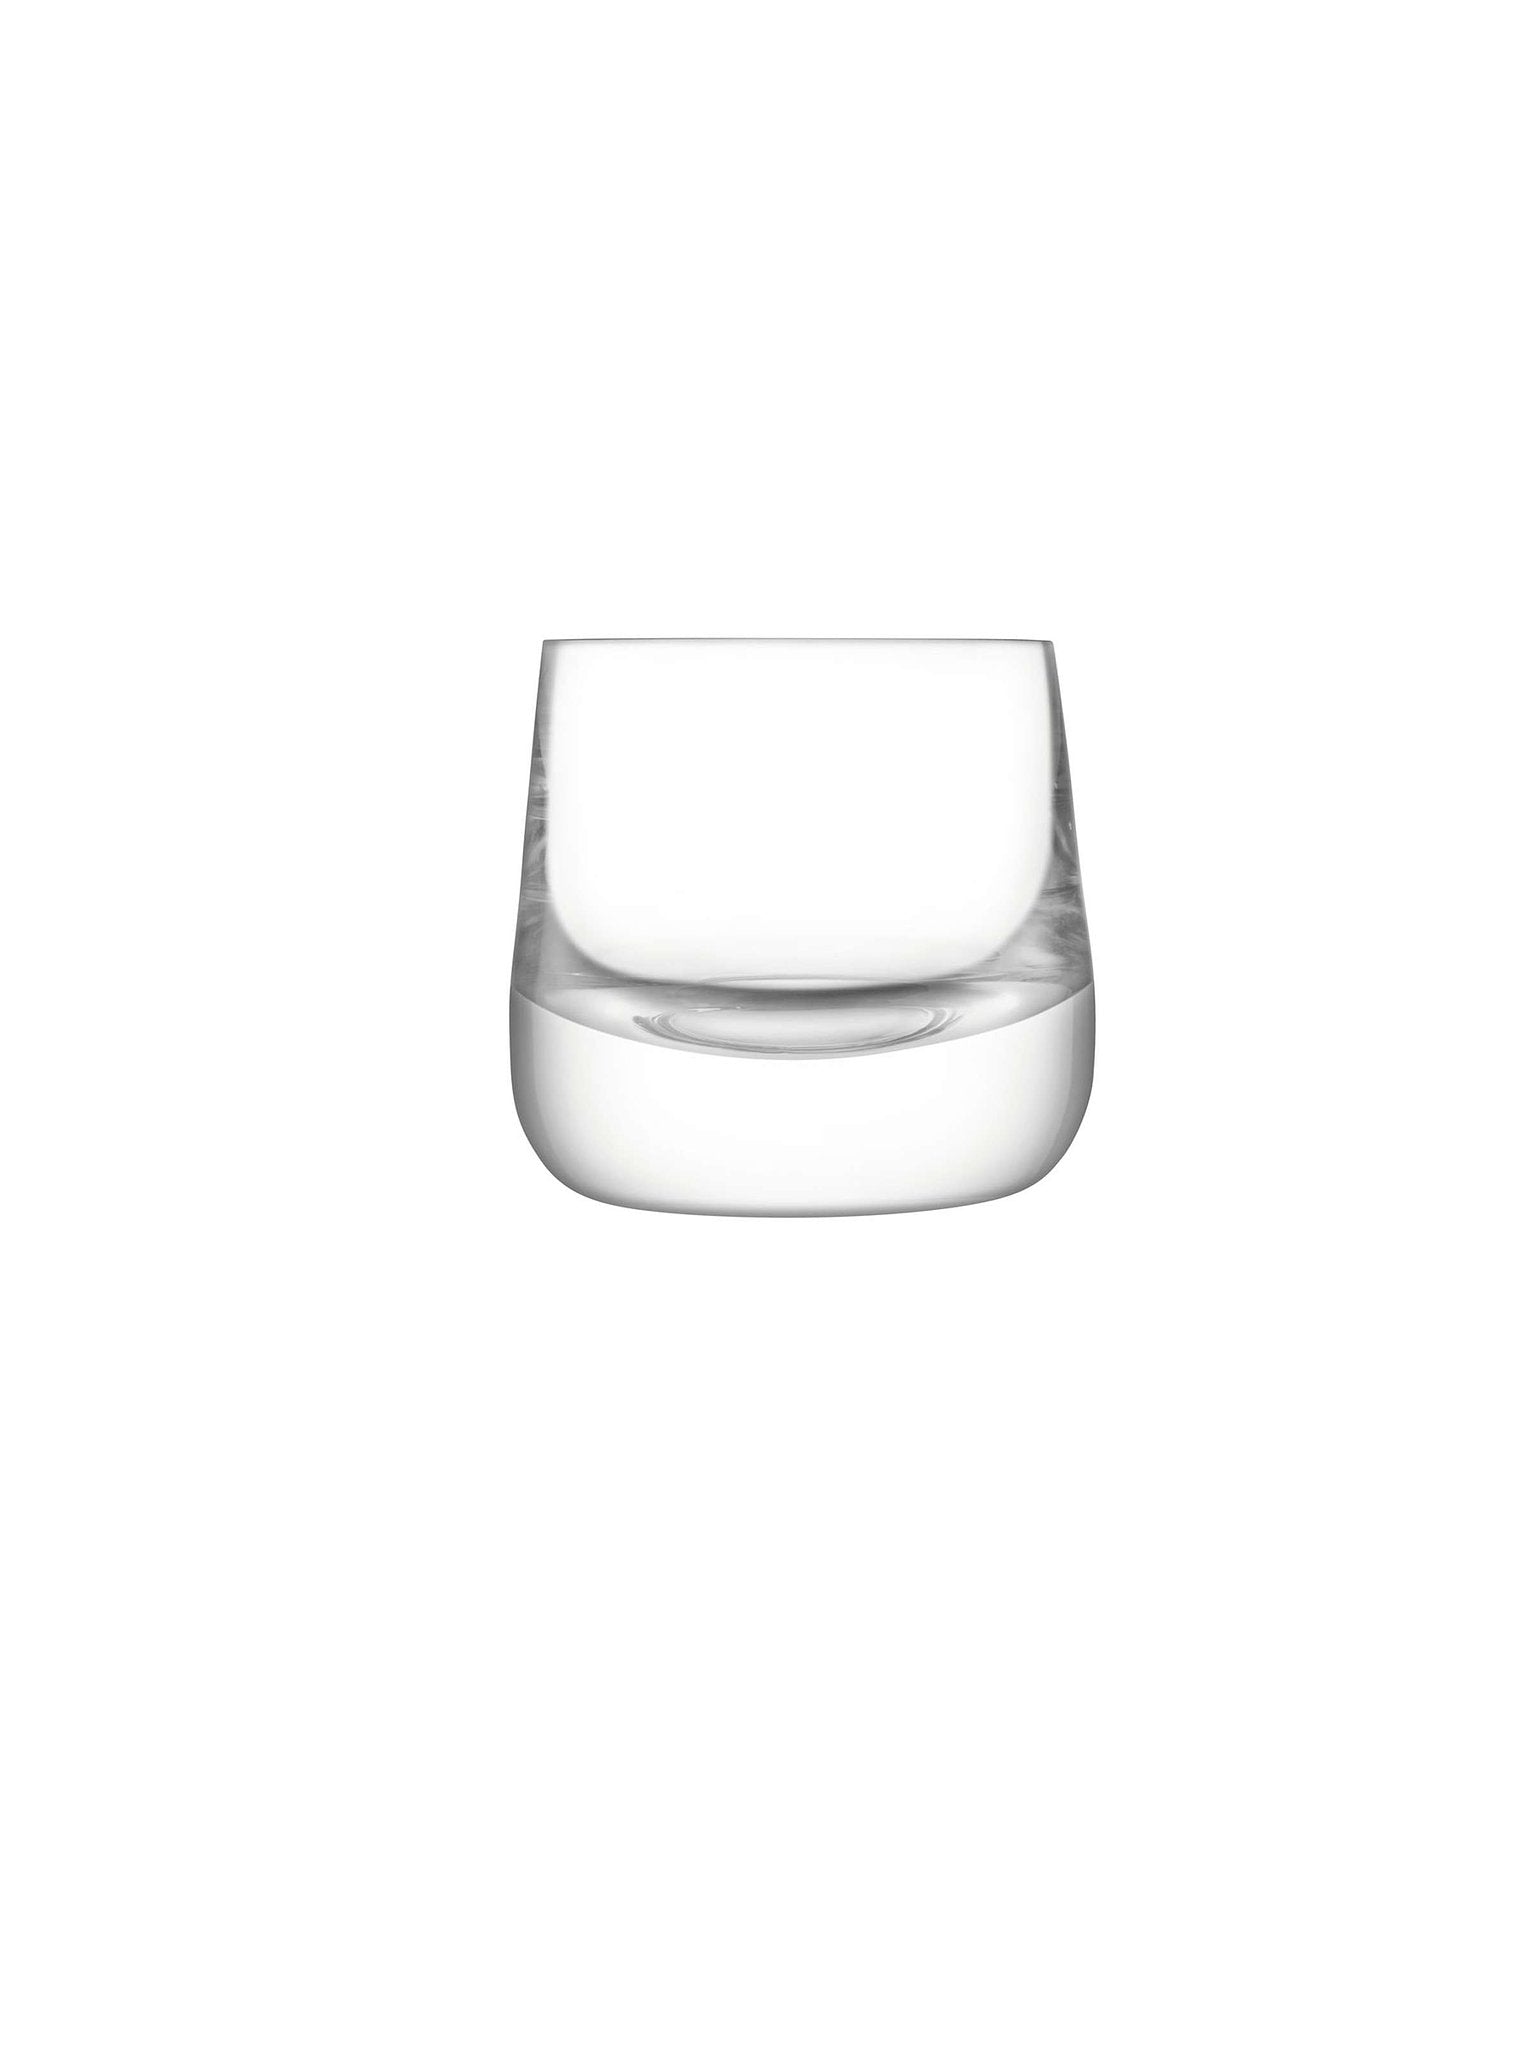 L.S.A. Bar Culture Whisky Glass 220 ml Set of 2 Pieces